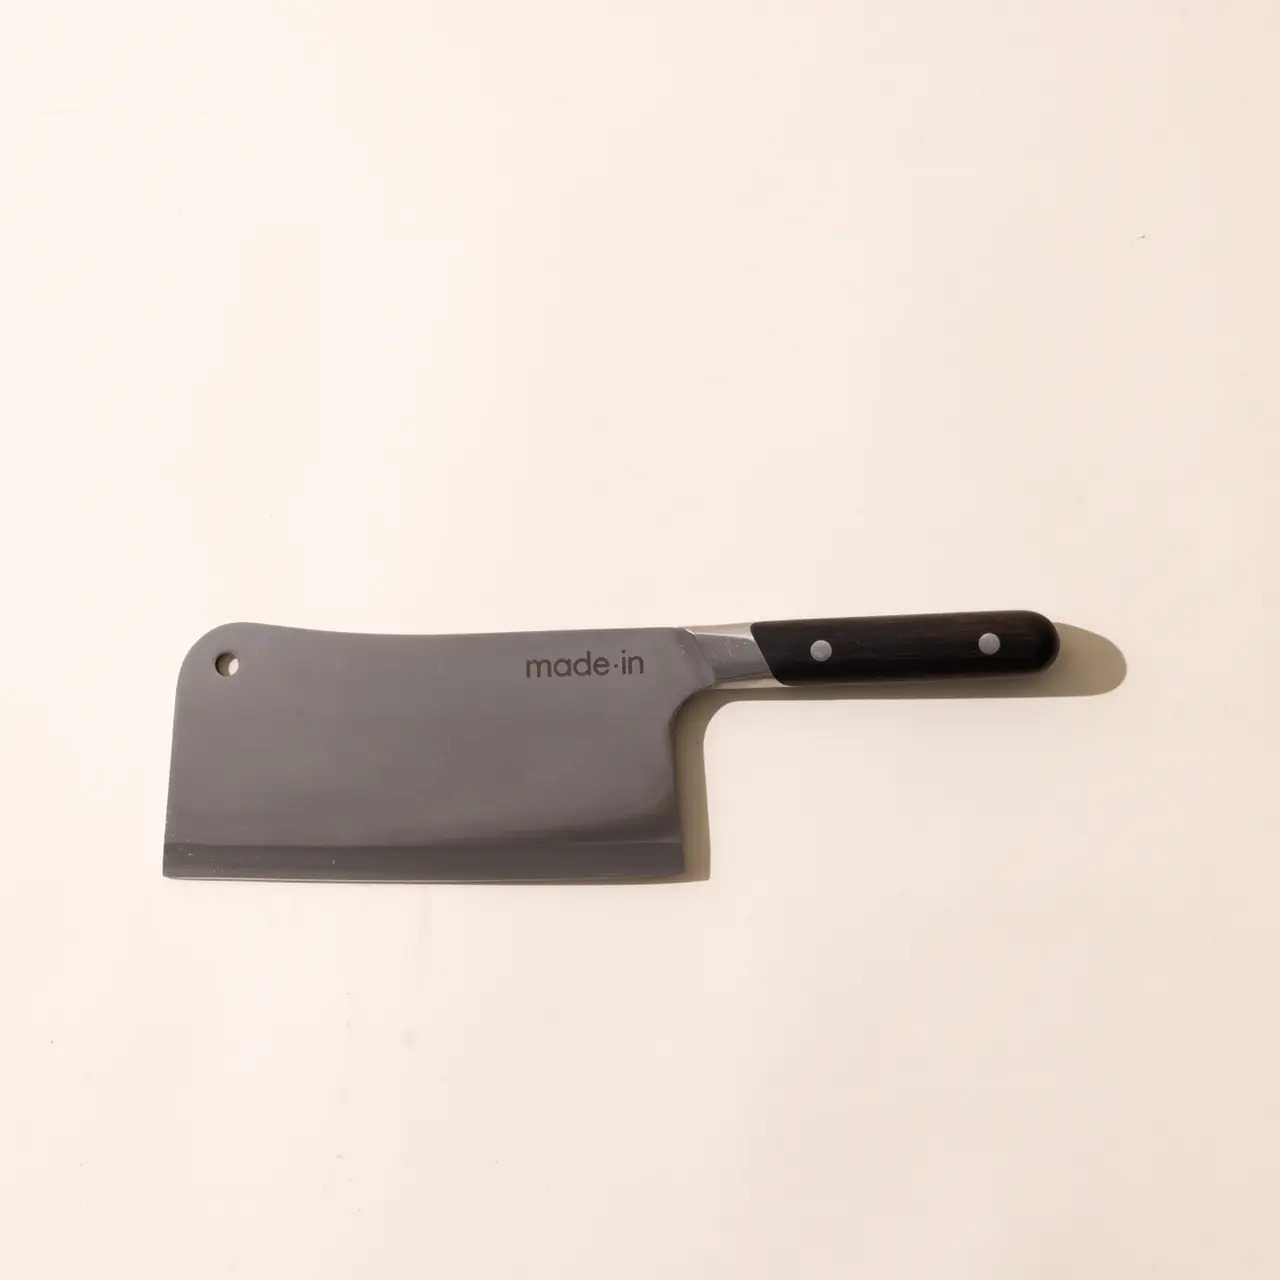 A cleaver with a black handle labeled "made.in" on a plain background.